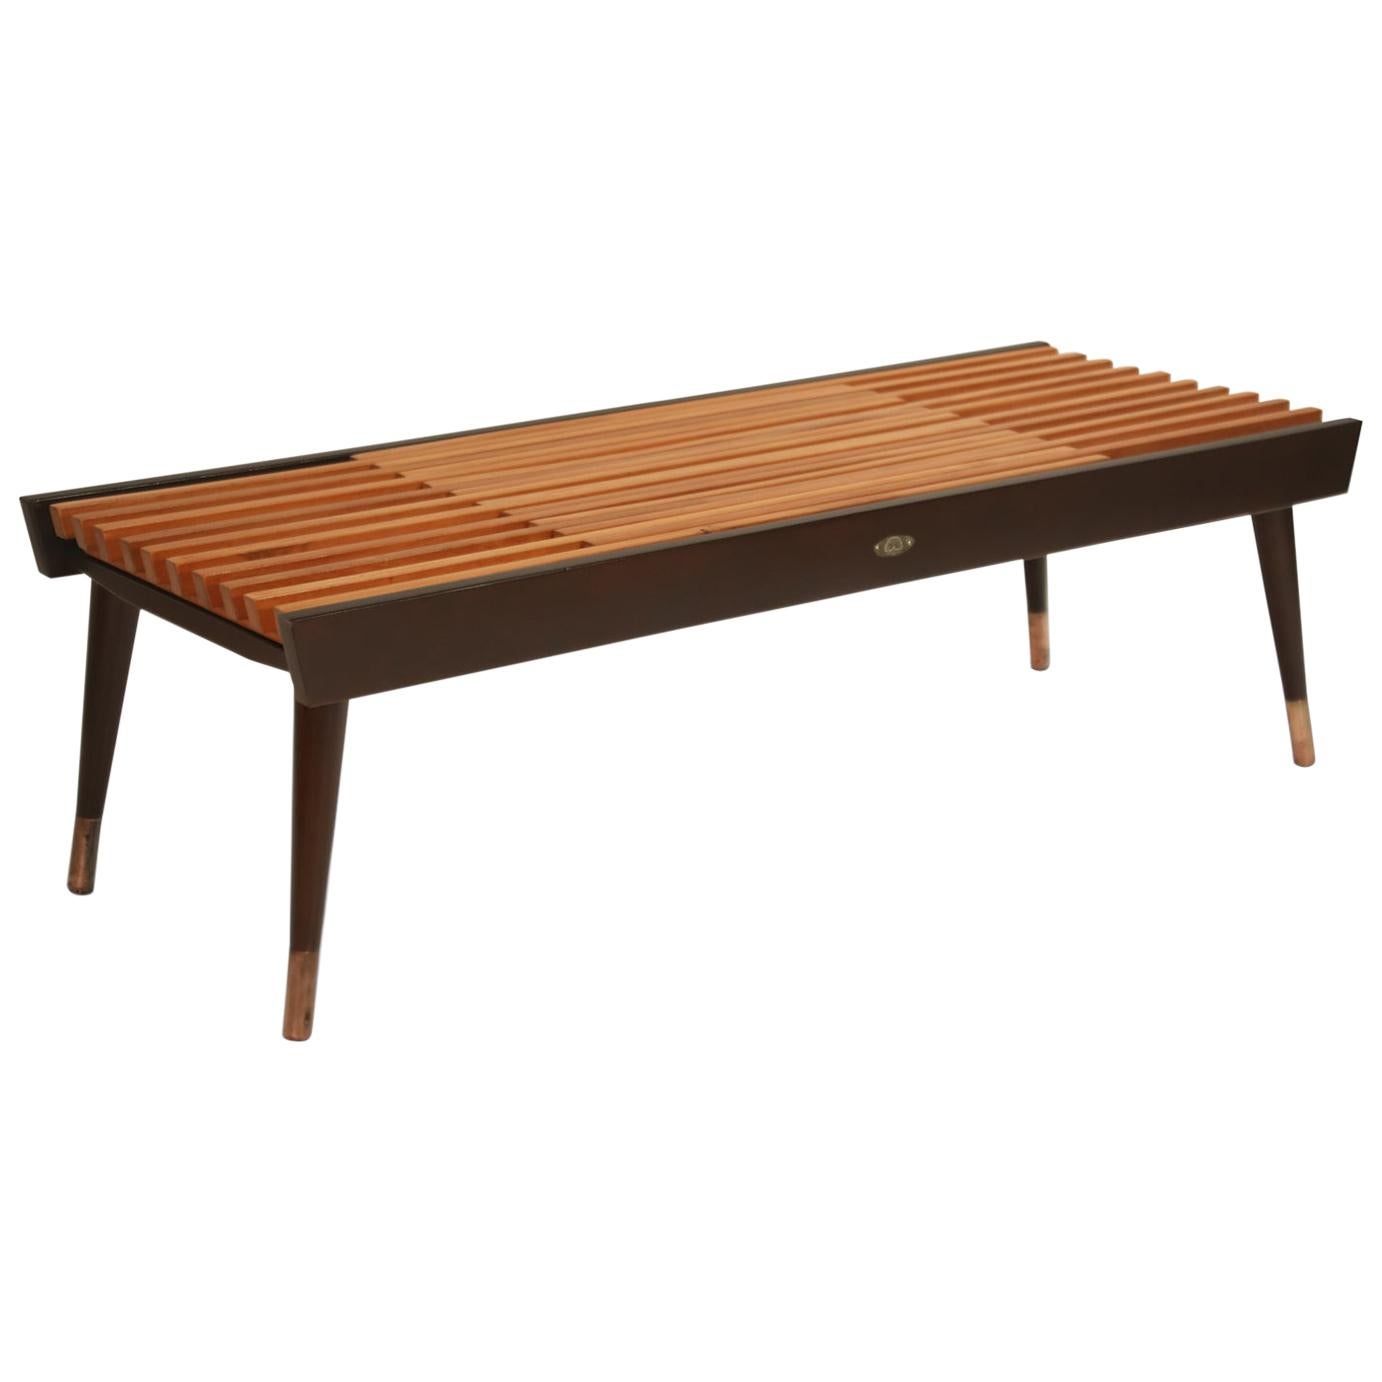 Extendable Slatted Wood Bench or Coffee Table by Maruni, 1950s Hiroshima Japan